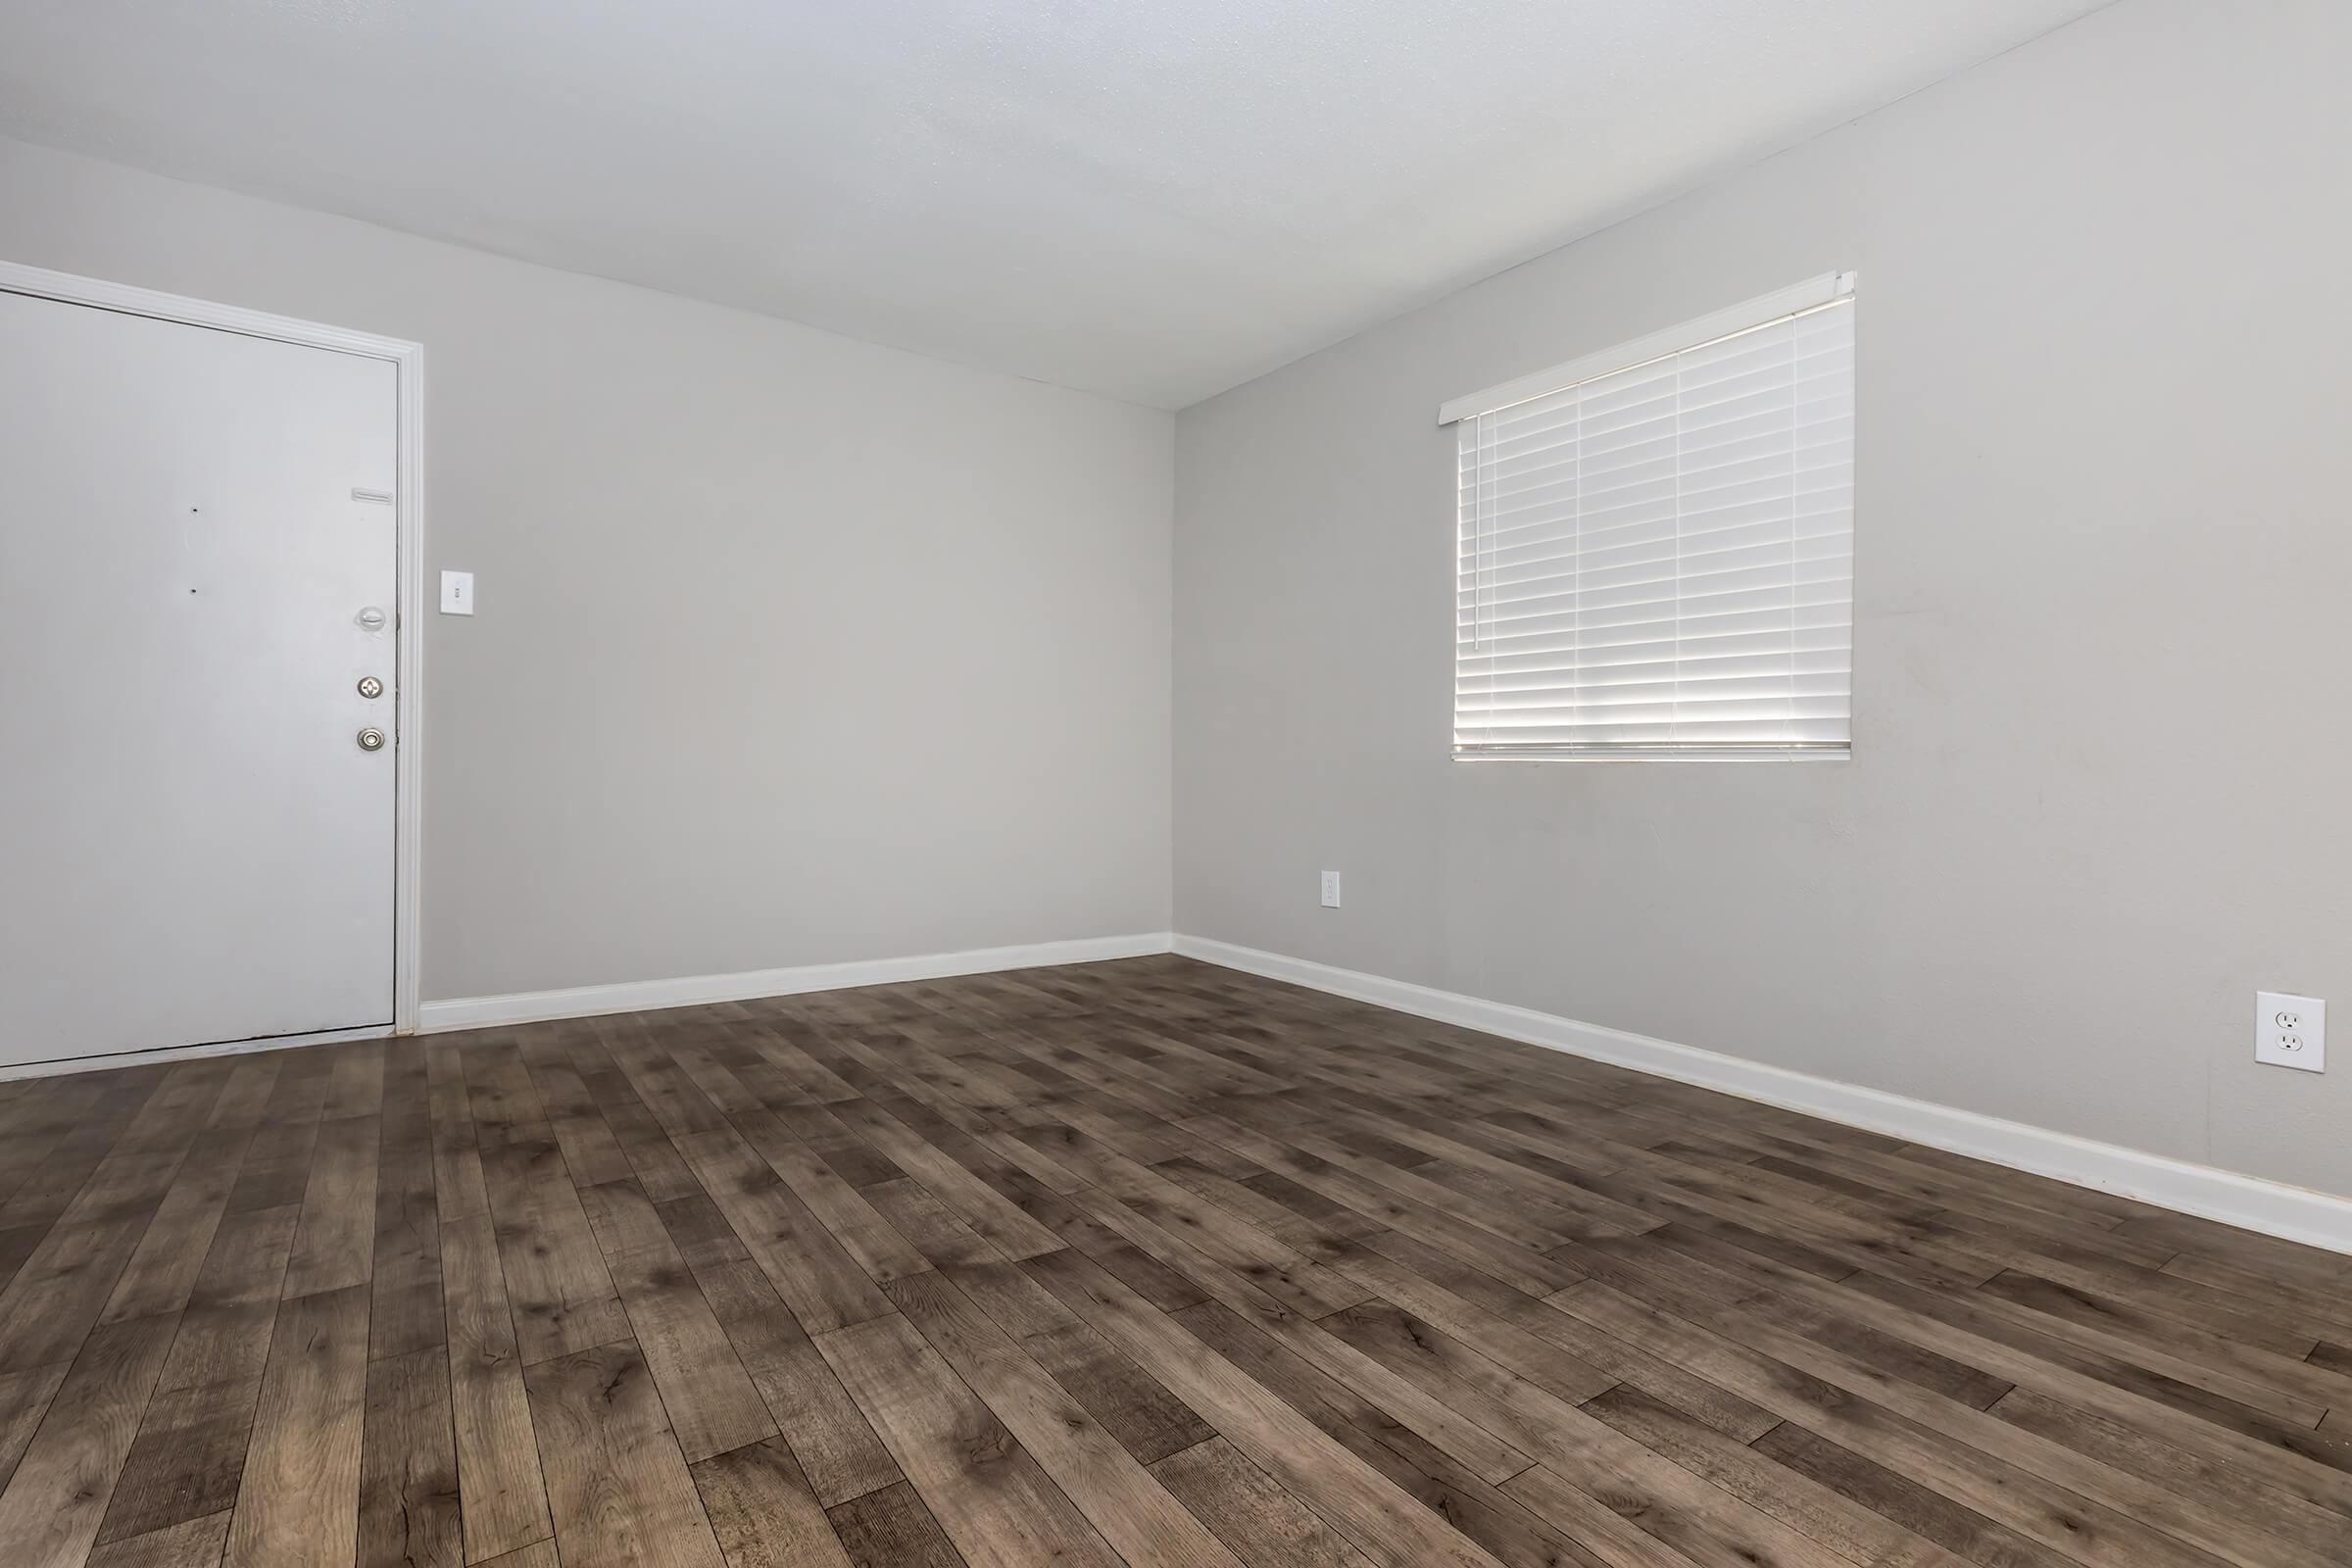 SPACIOUS APARTMENTS FOR RENT IN HOUSTON, TX